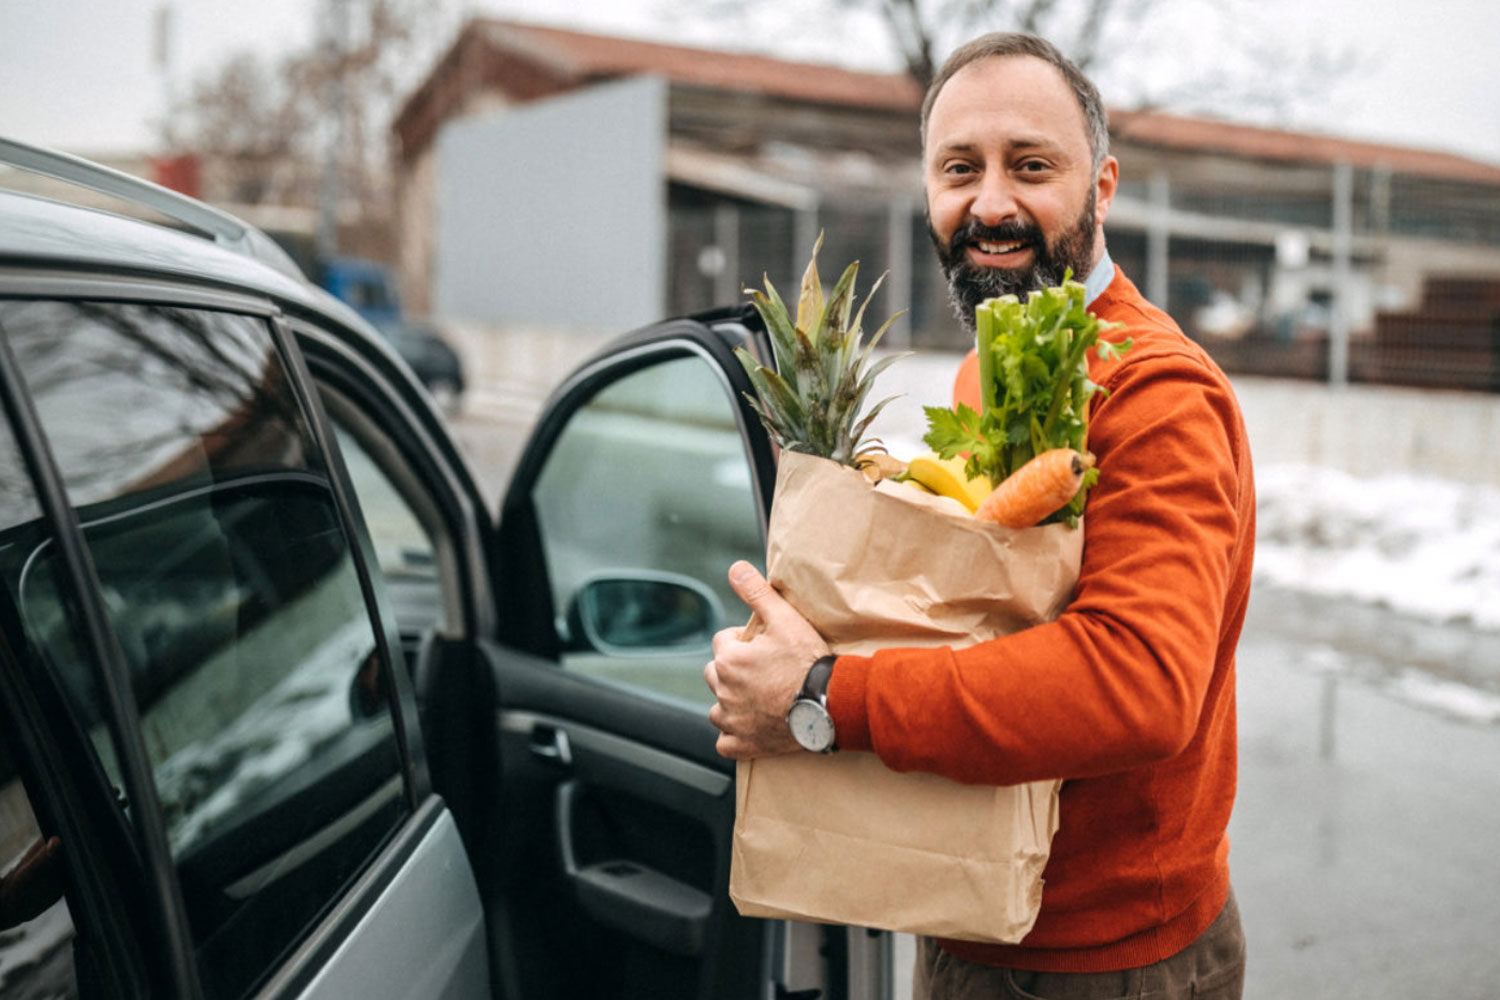 man holding a bag of vegtables and fruit